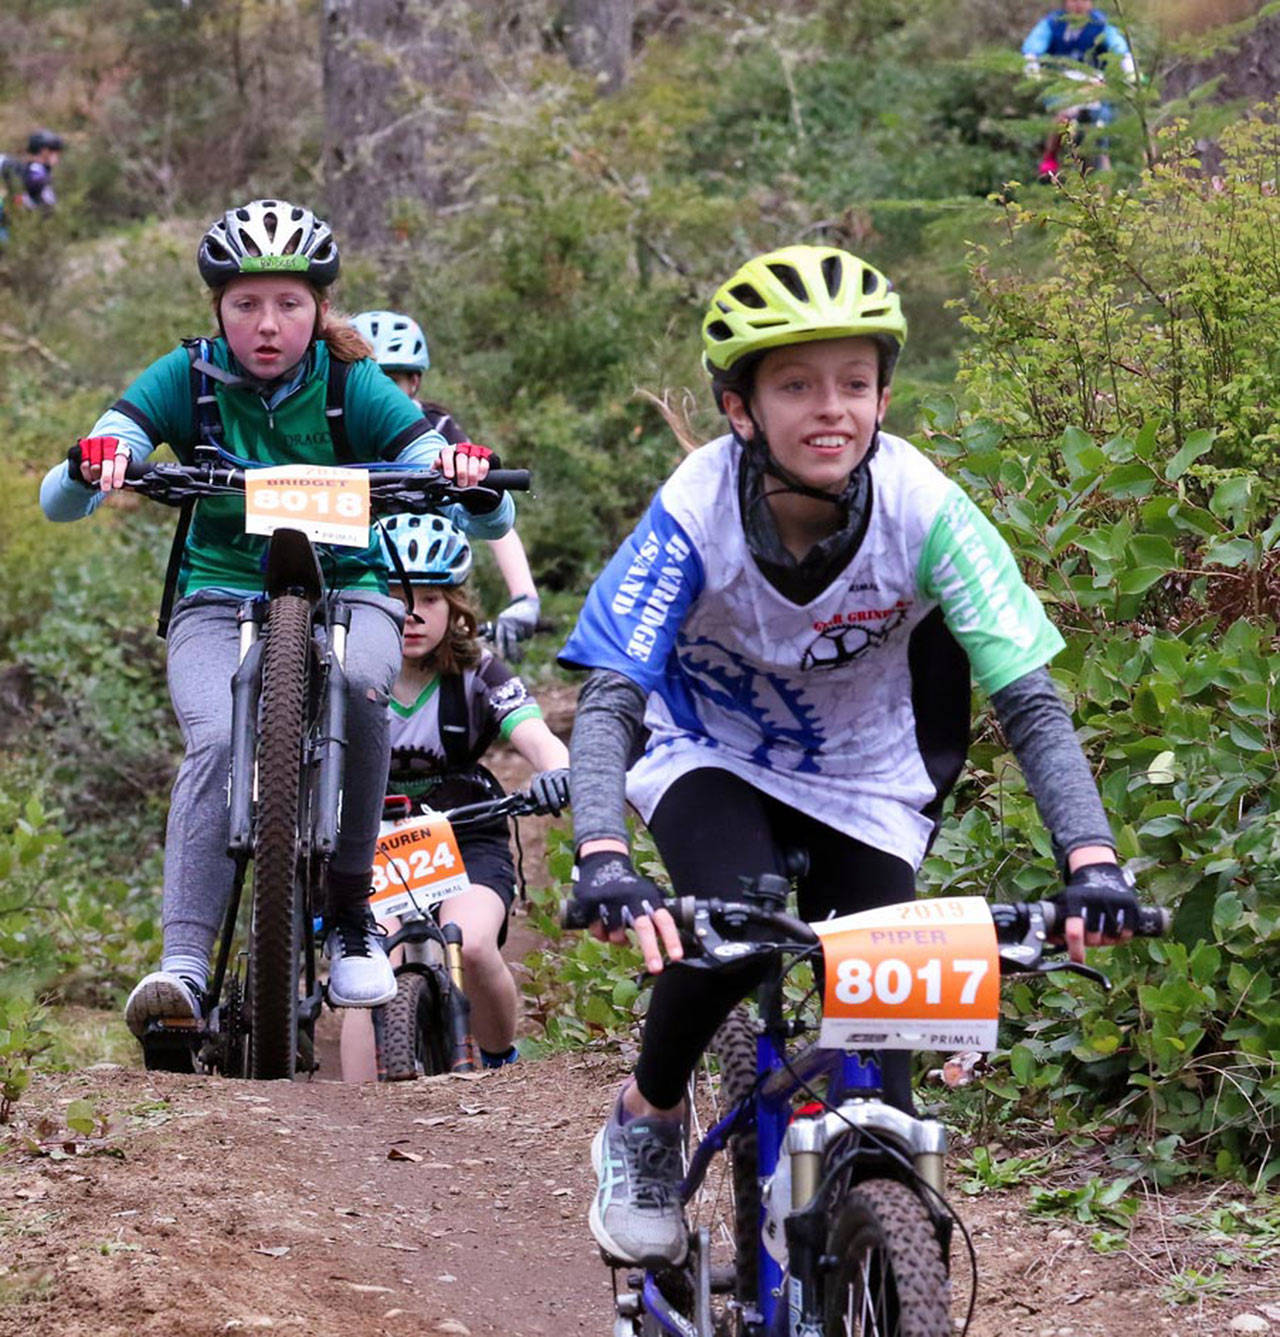 The Gear Grinders had 41 riders compete in the kickoff race for this year’s competitive mountain bike racing season. (Photo courtesy of Woodinville Bicycle)